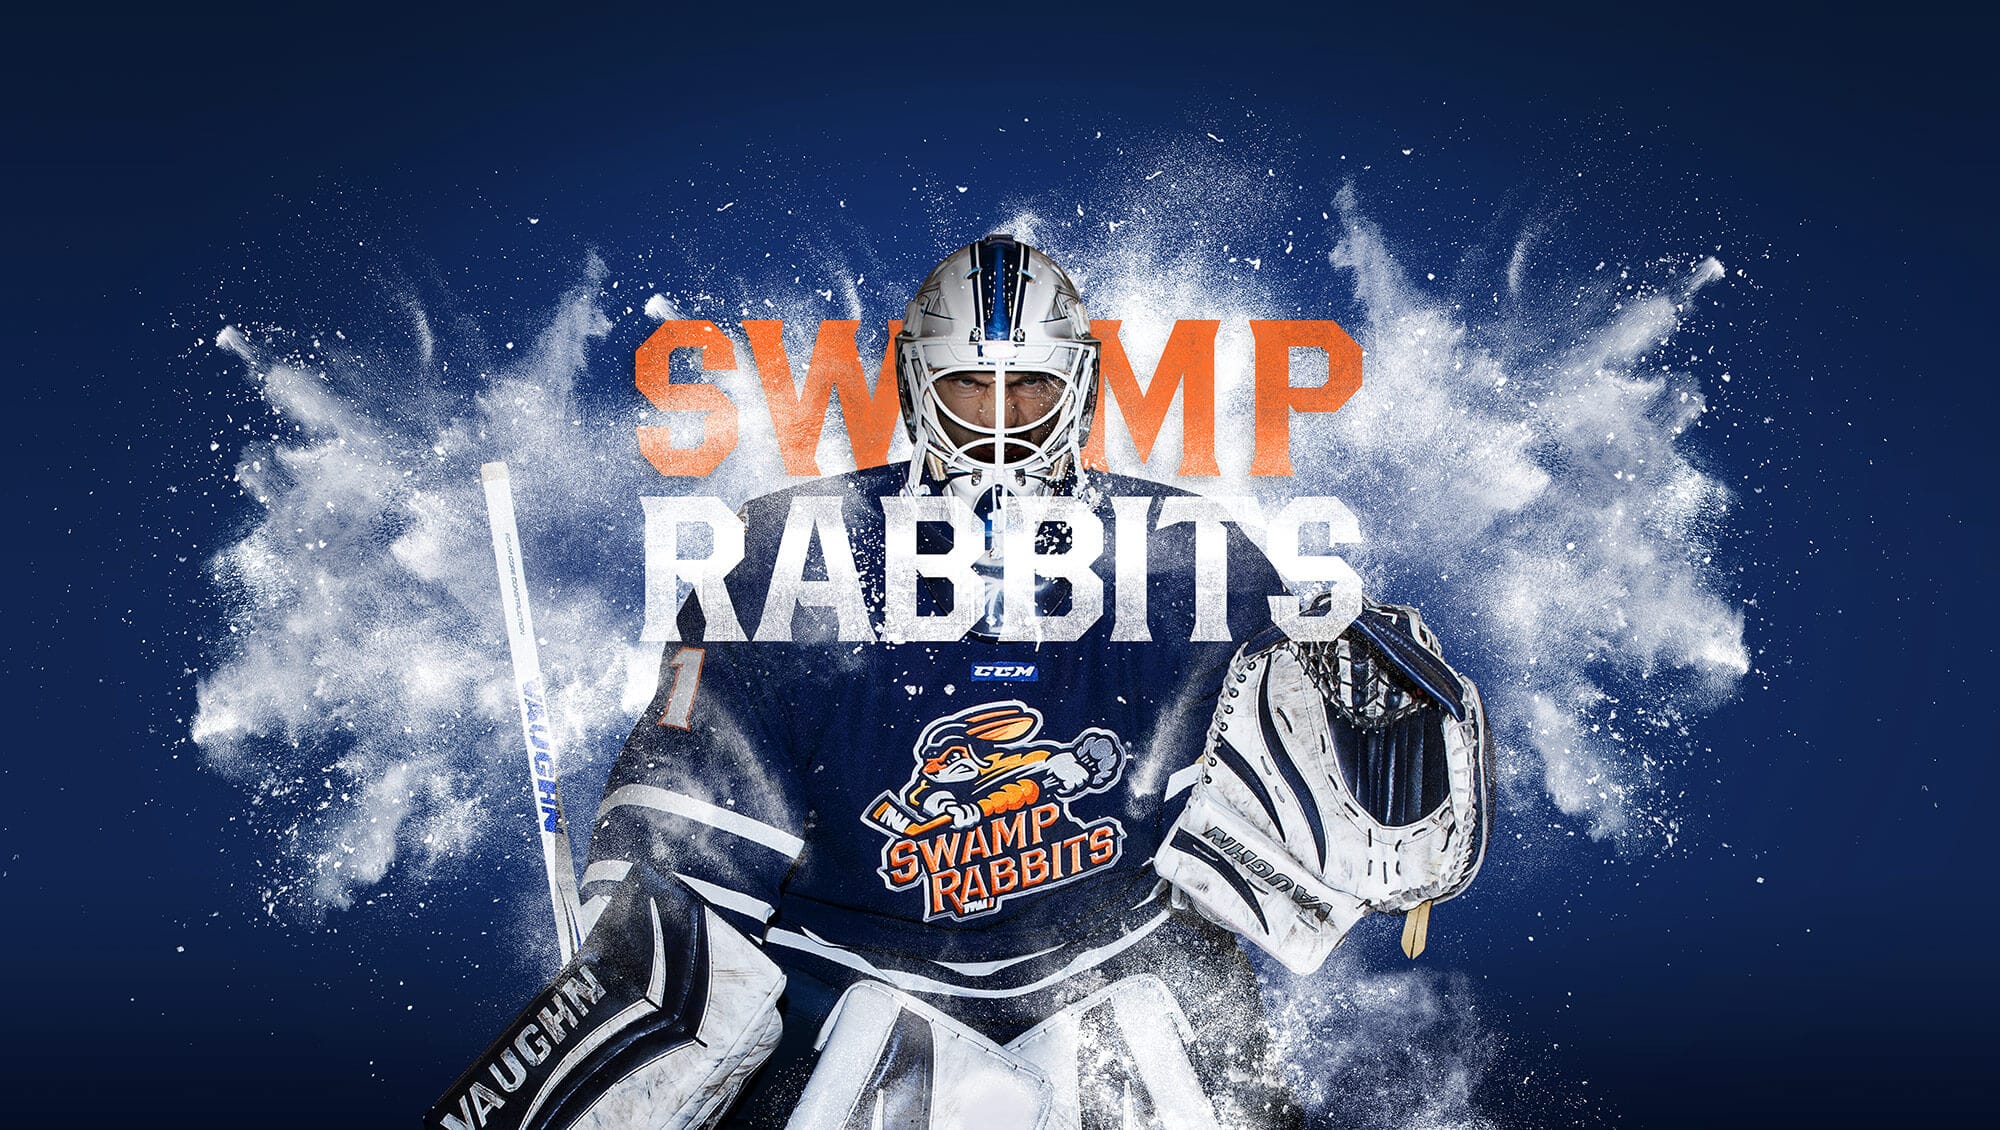 Greenville Swamp Rabbits on X: Fans, We've heard you! The Hop